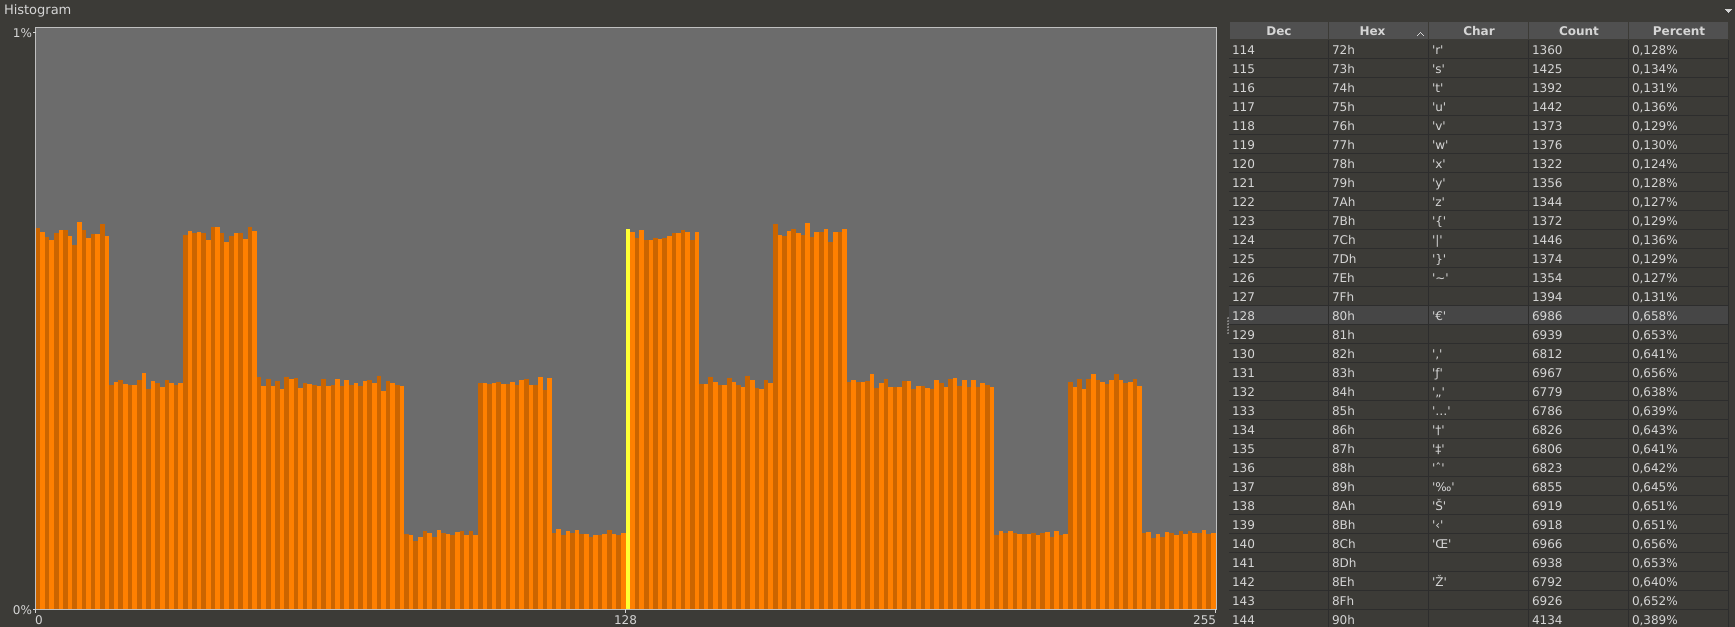 Histogram of byte number 1 of all collected challenges